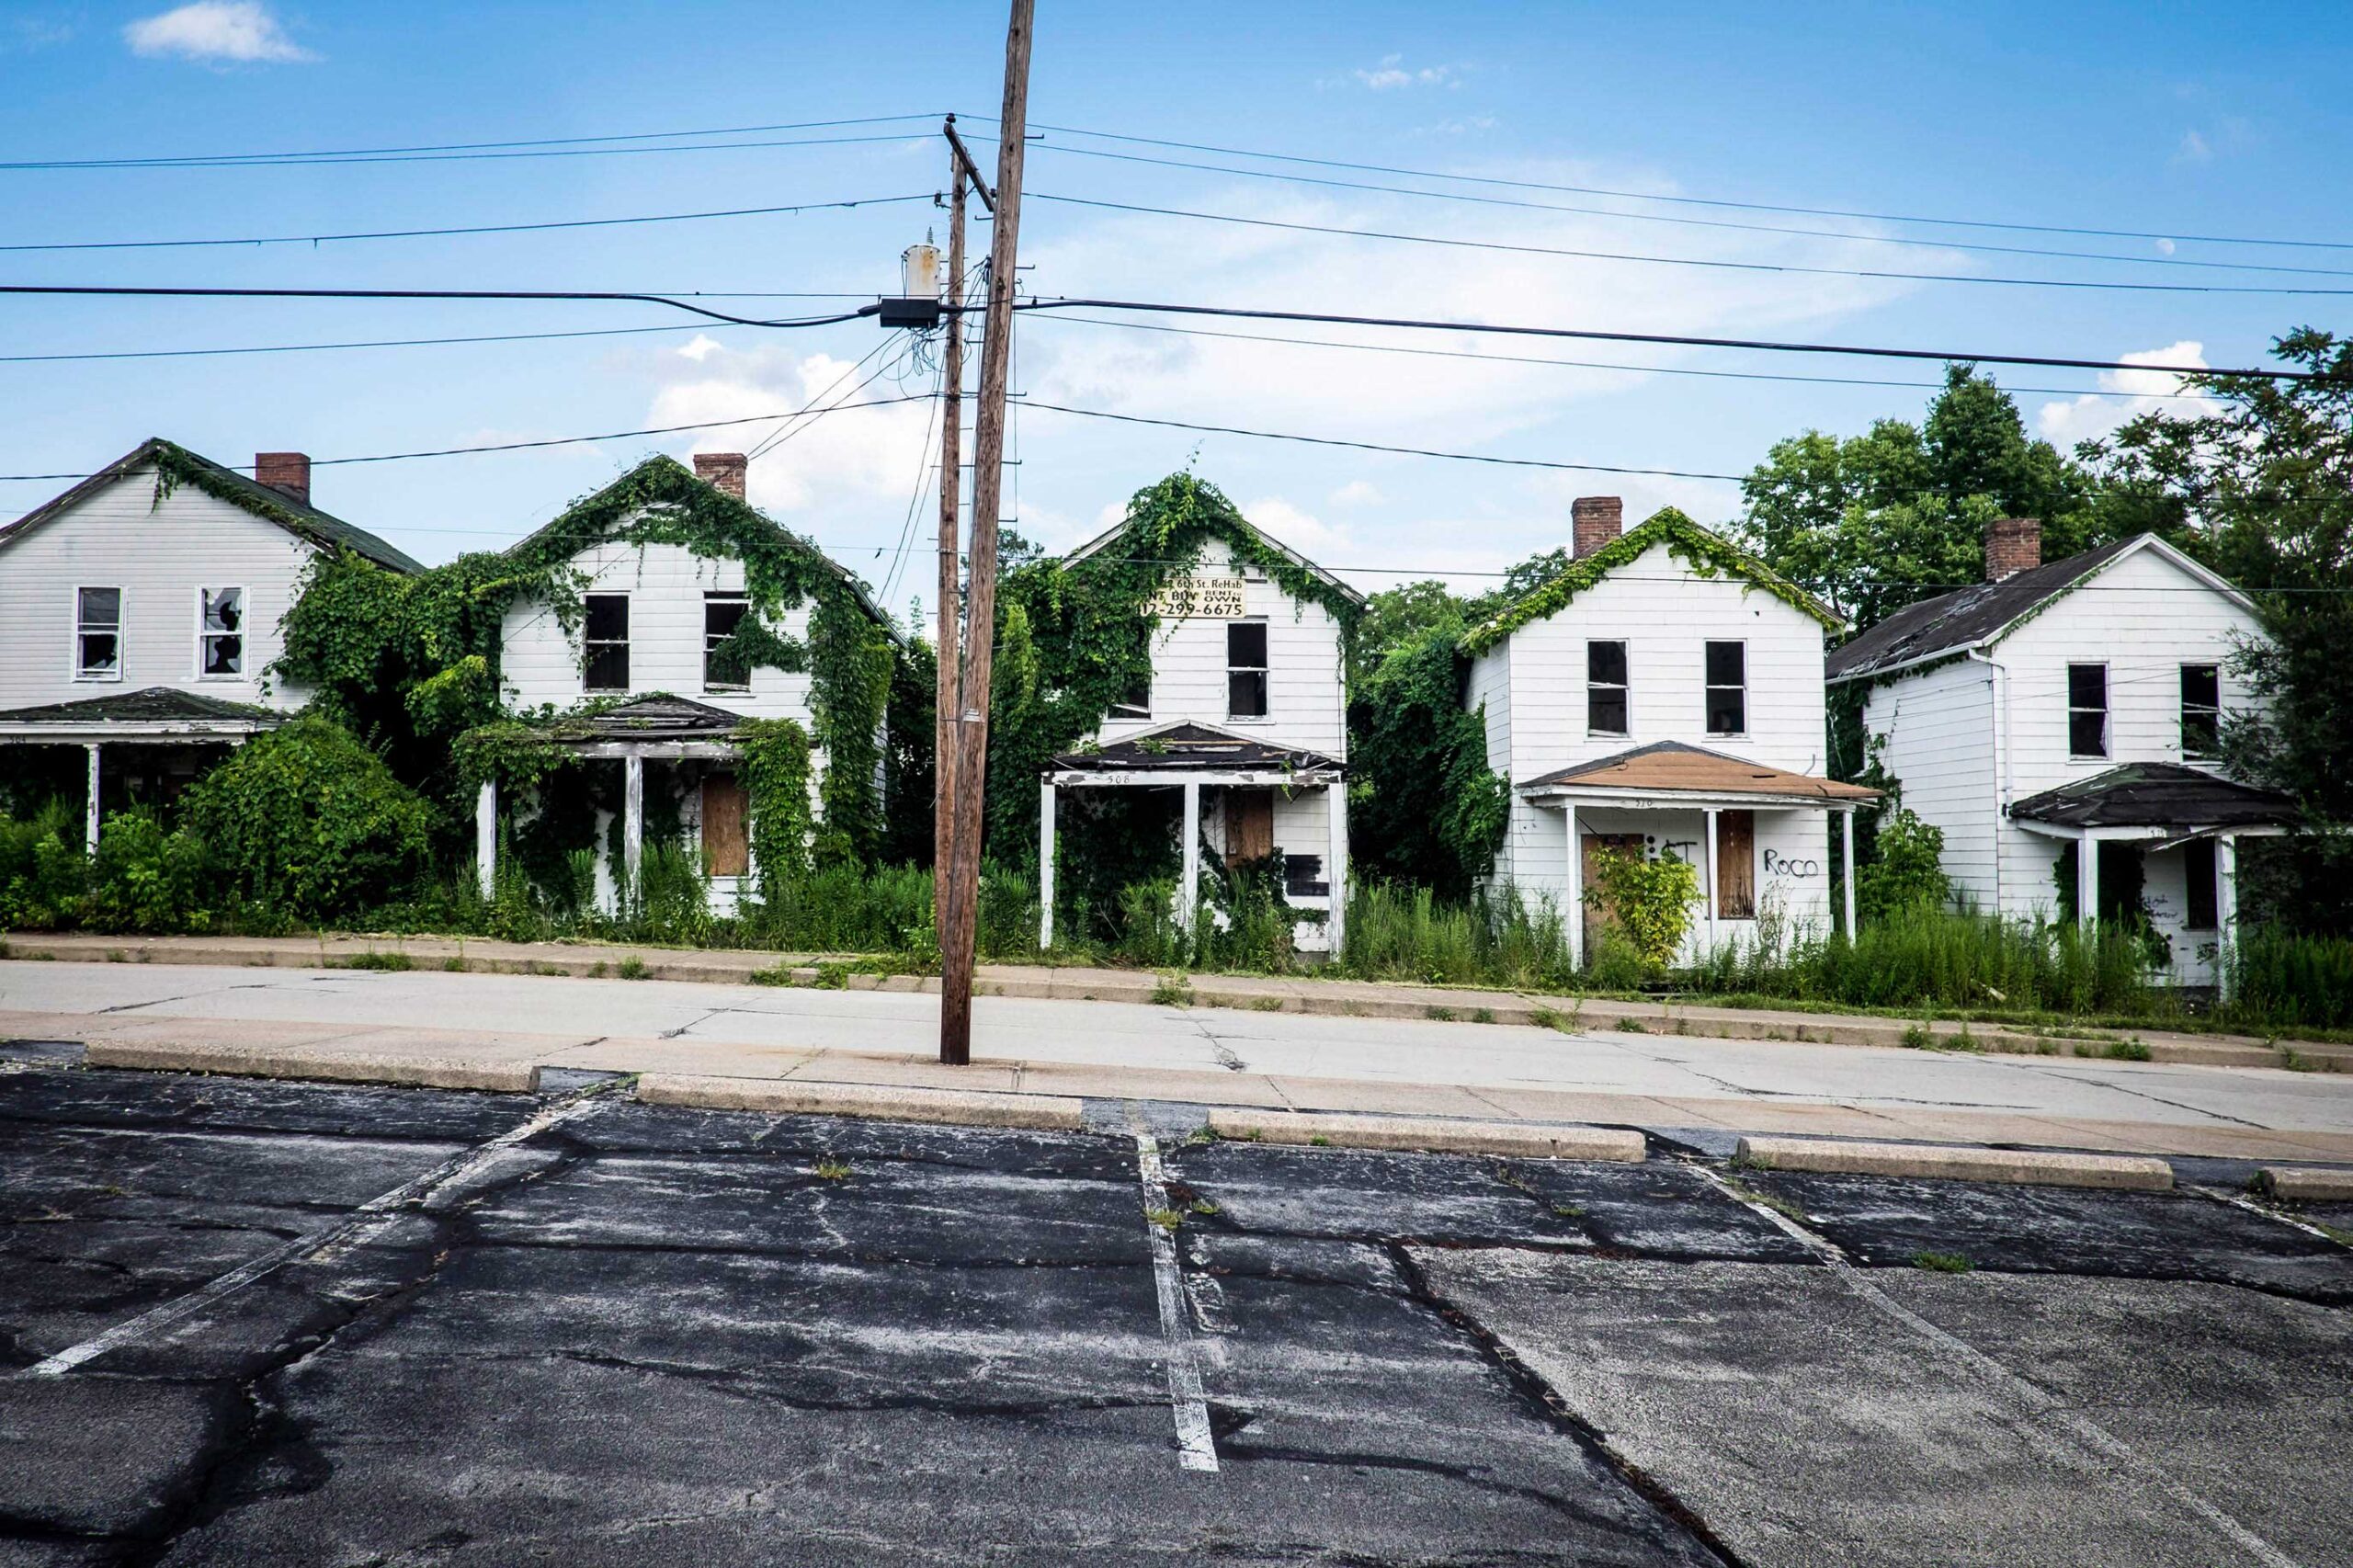 A photograph of abandoned and dilapidated row houses in Monessen, Pennsylvania.